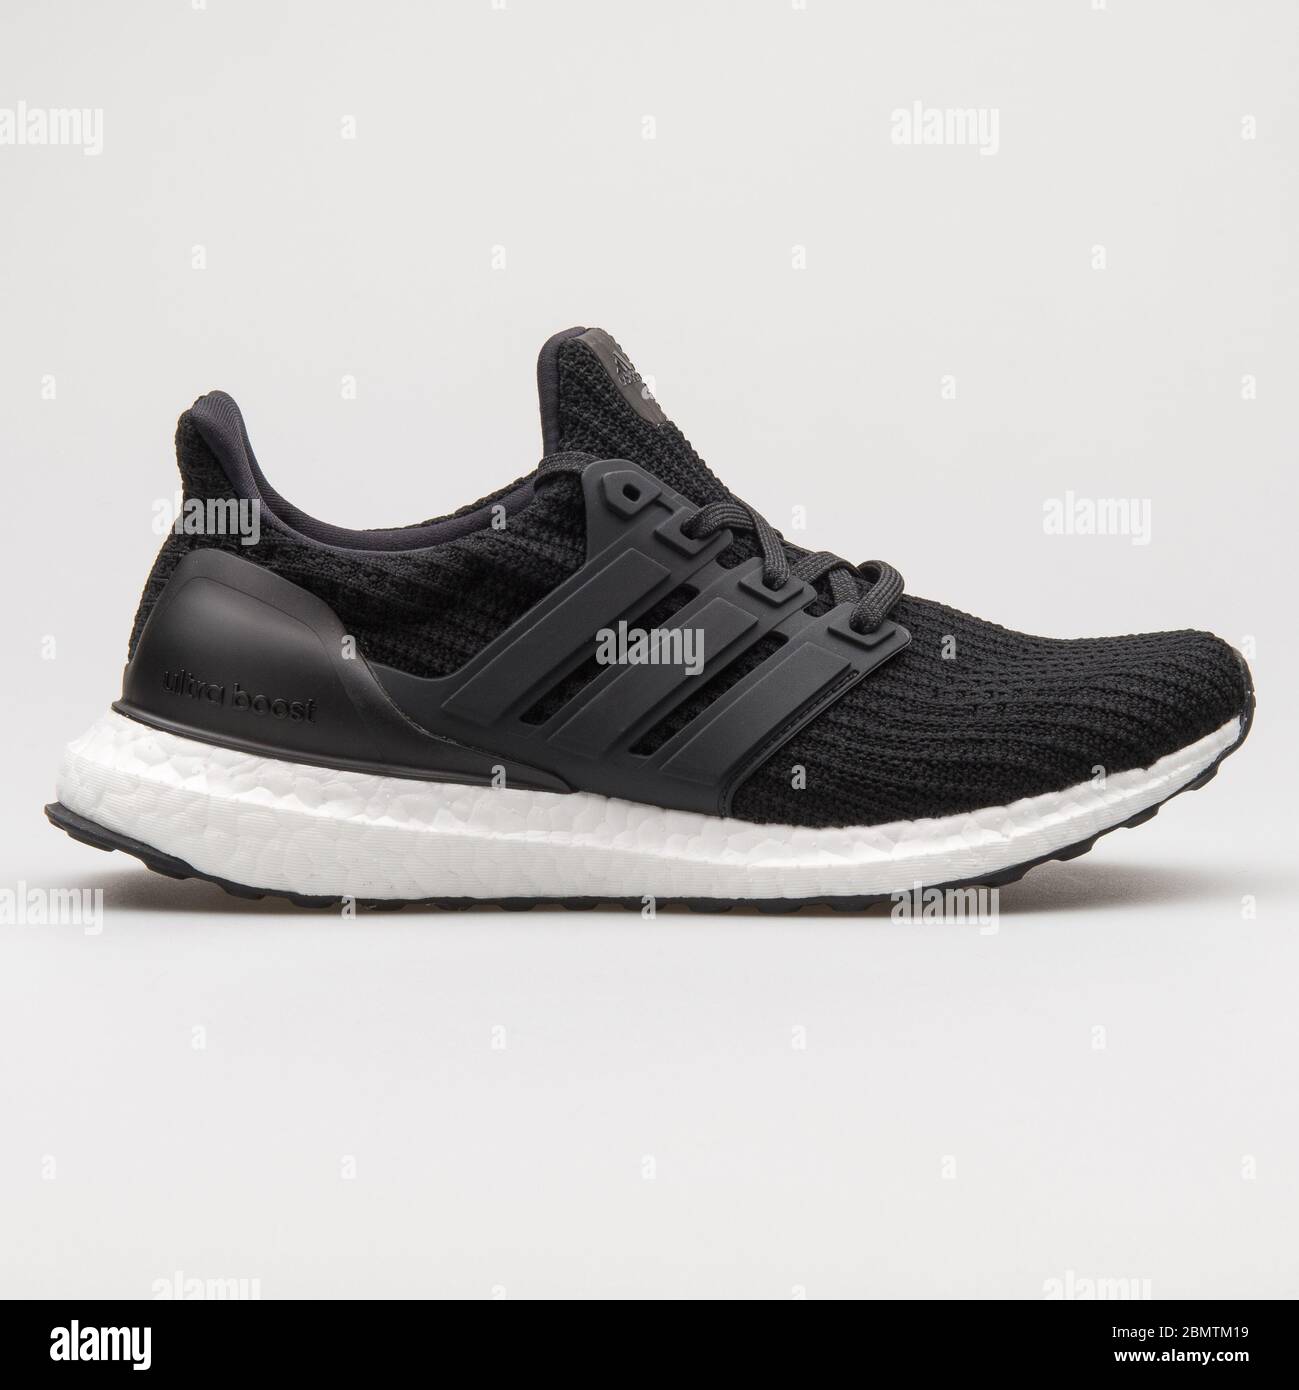 Adidas Ultra Boost High Resolution Stock Photography and Images - Alamy